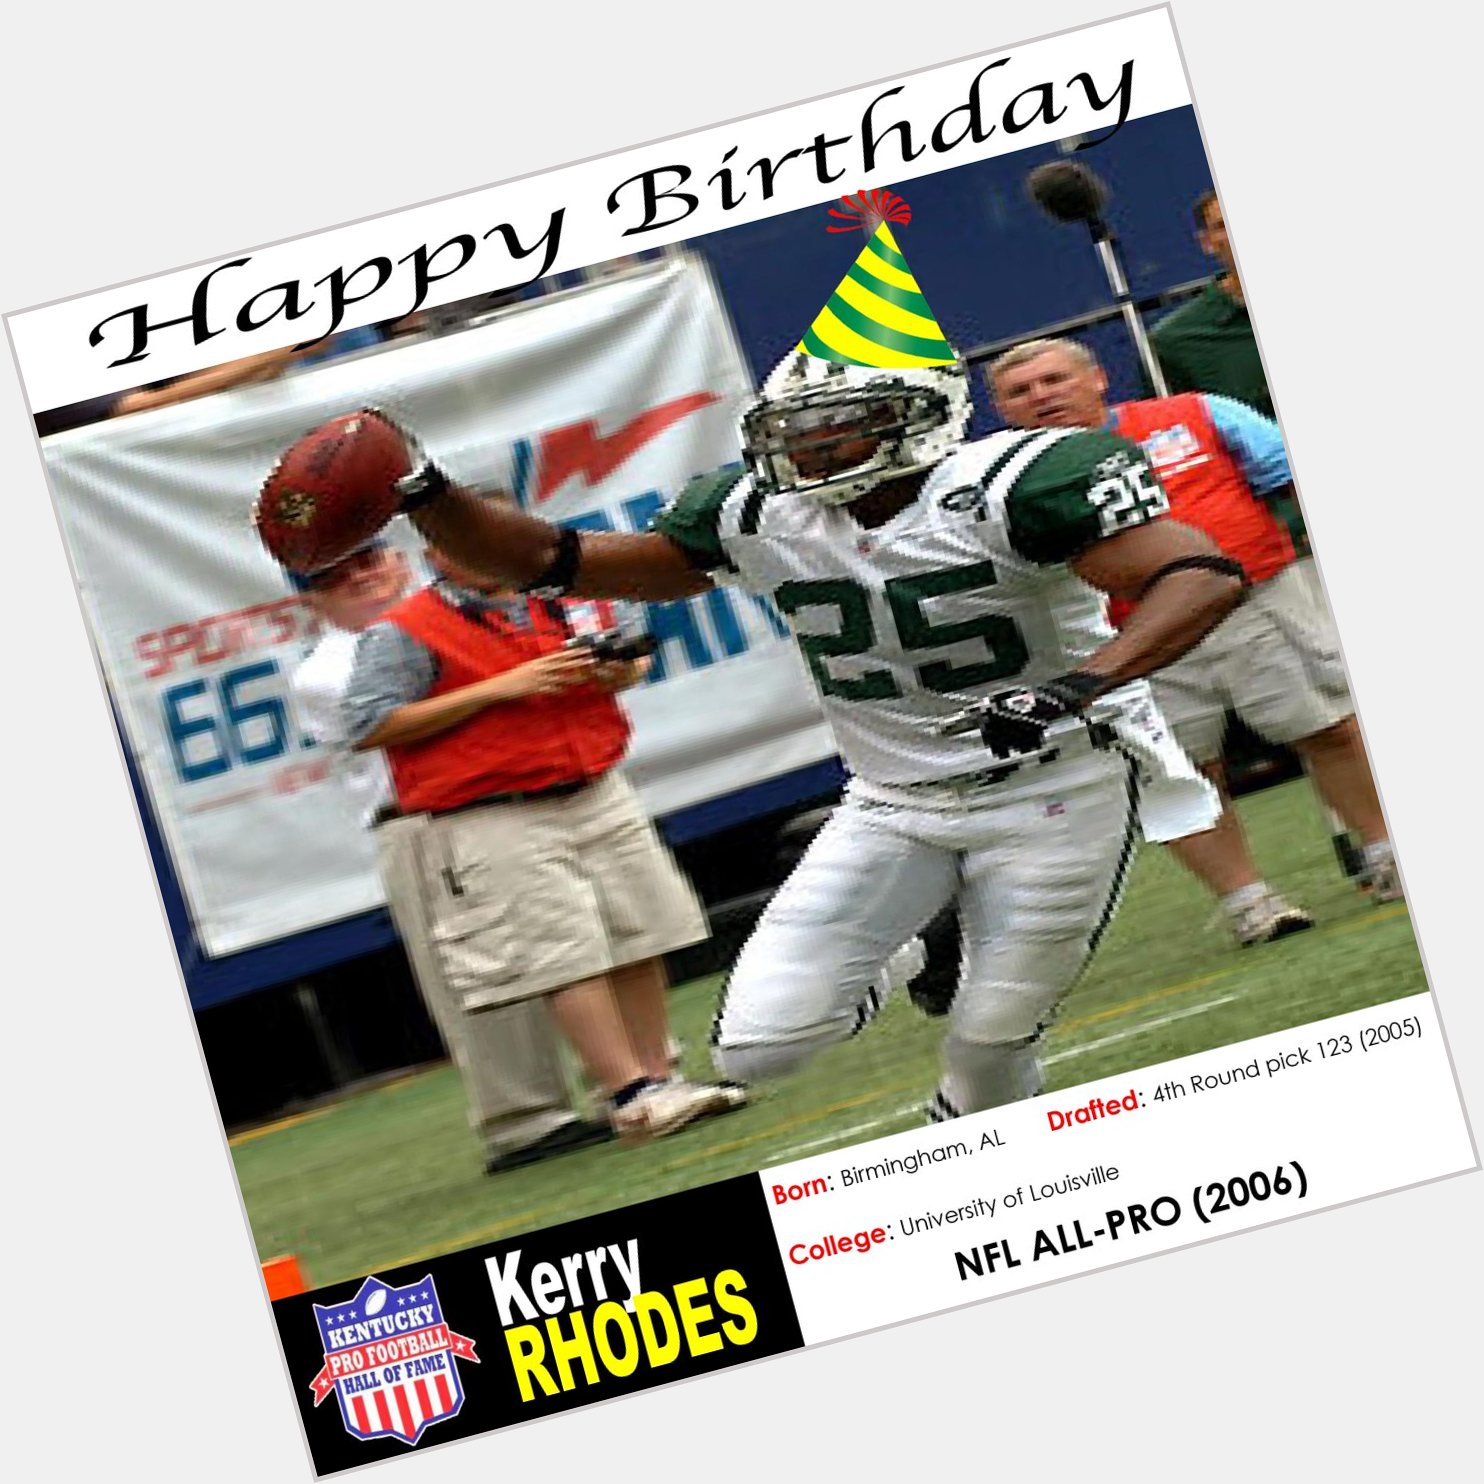 Today is KY Pro Football Hall of Famer Kerry Rhodes\s birthday! Wish him a happy birthday with a 